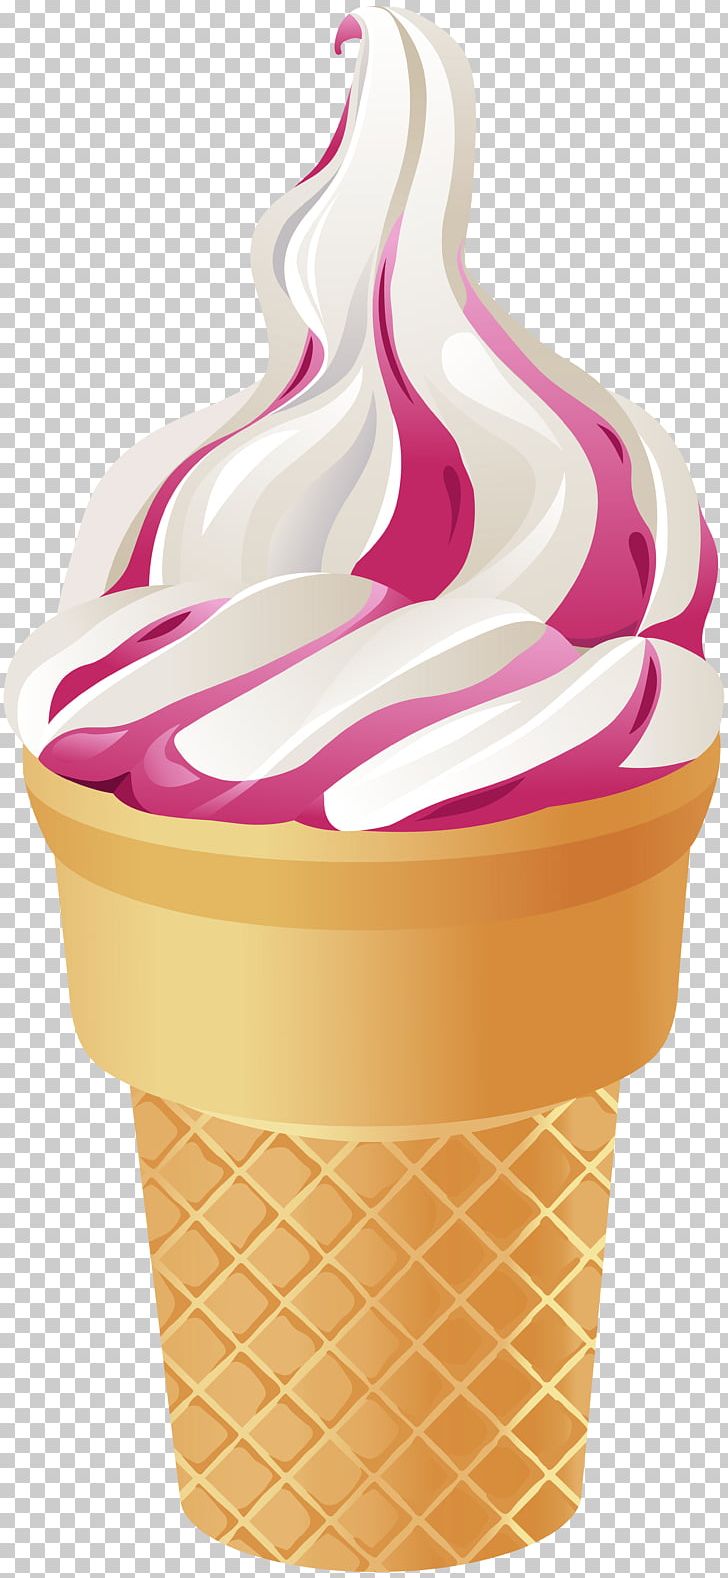 Ice Cream Cones Sundae Chocolate Ice Cream Milk PNG, Clipart, Chocolate, Chocolate Ice Cream, Cream, Cup, Dairy Product Free PNG Download